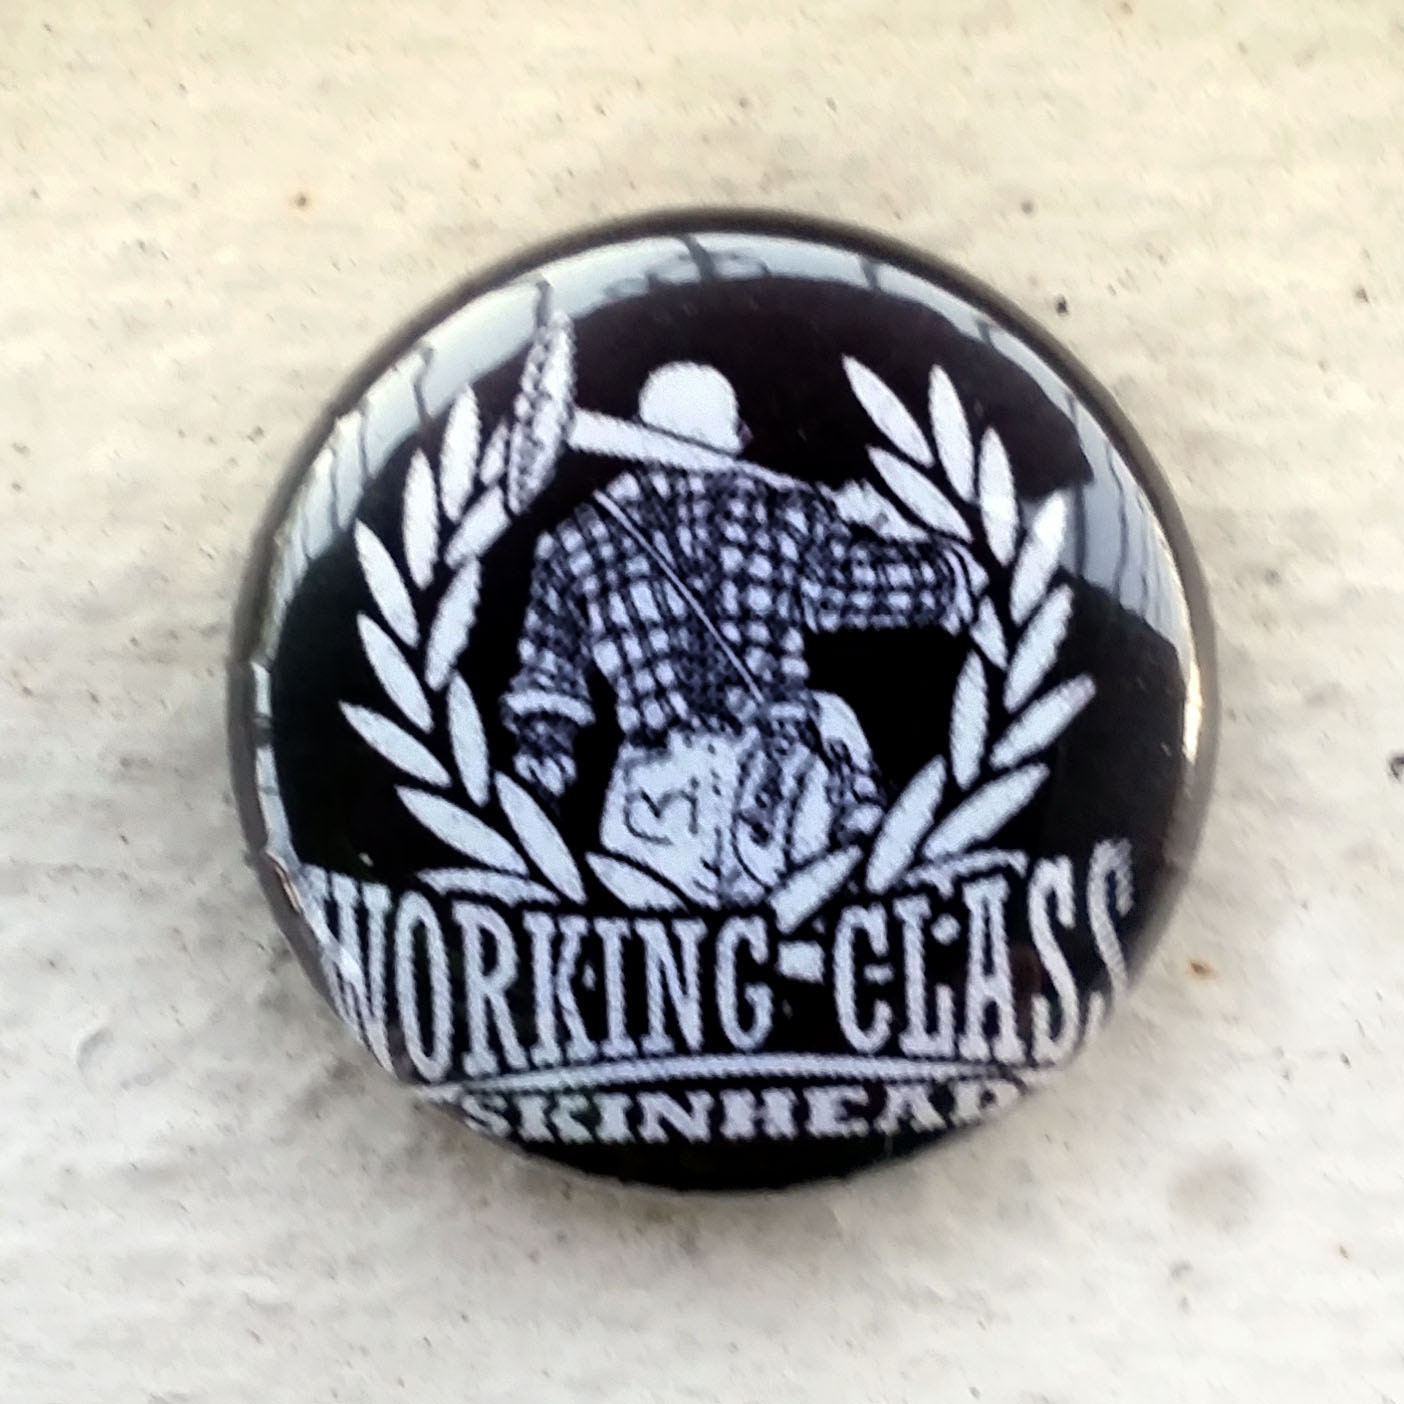 Working Class Skinhead 1 inch Button